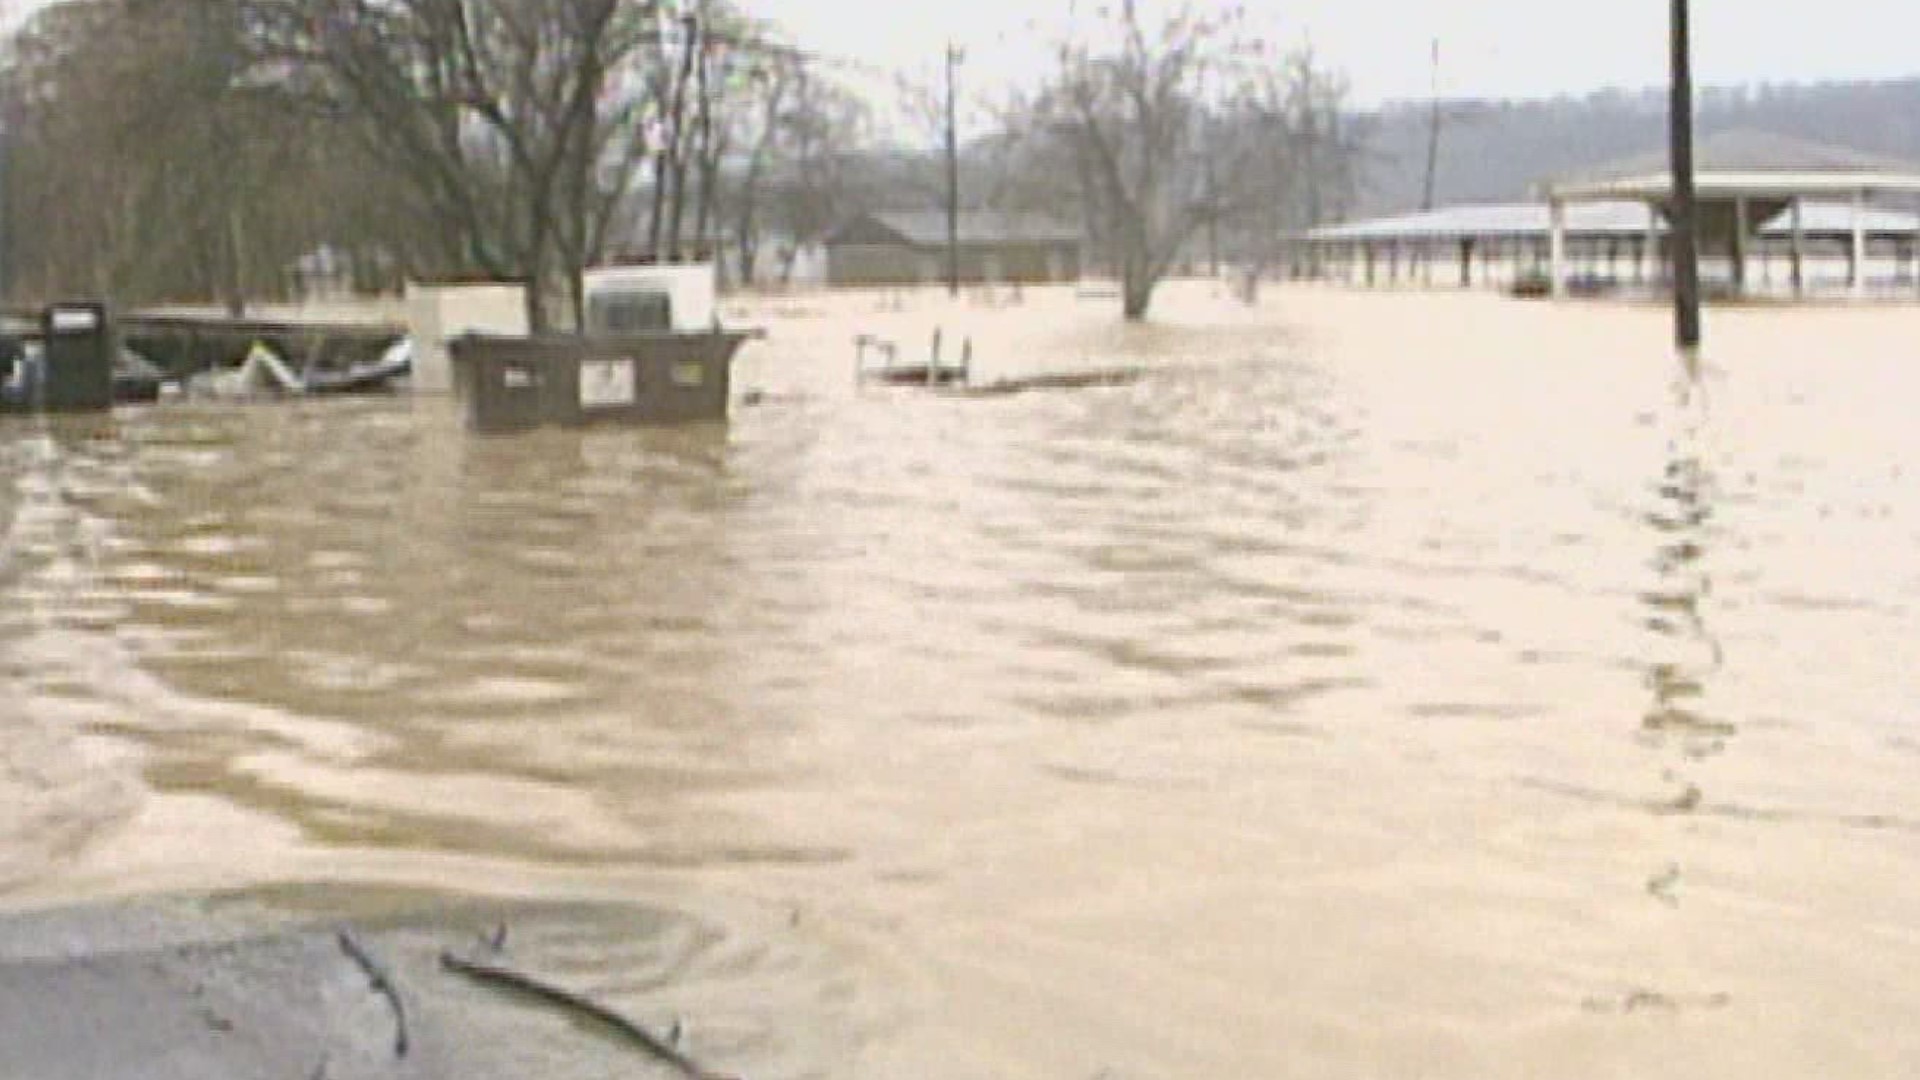 The March 1997 flooding destroyed homes and caused millions in damage. Here's a look back at how many were helped during the event.